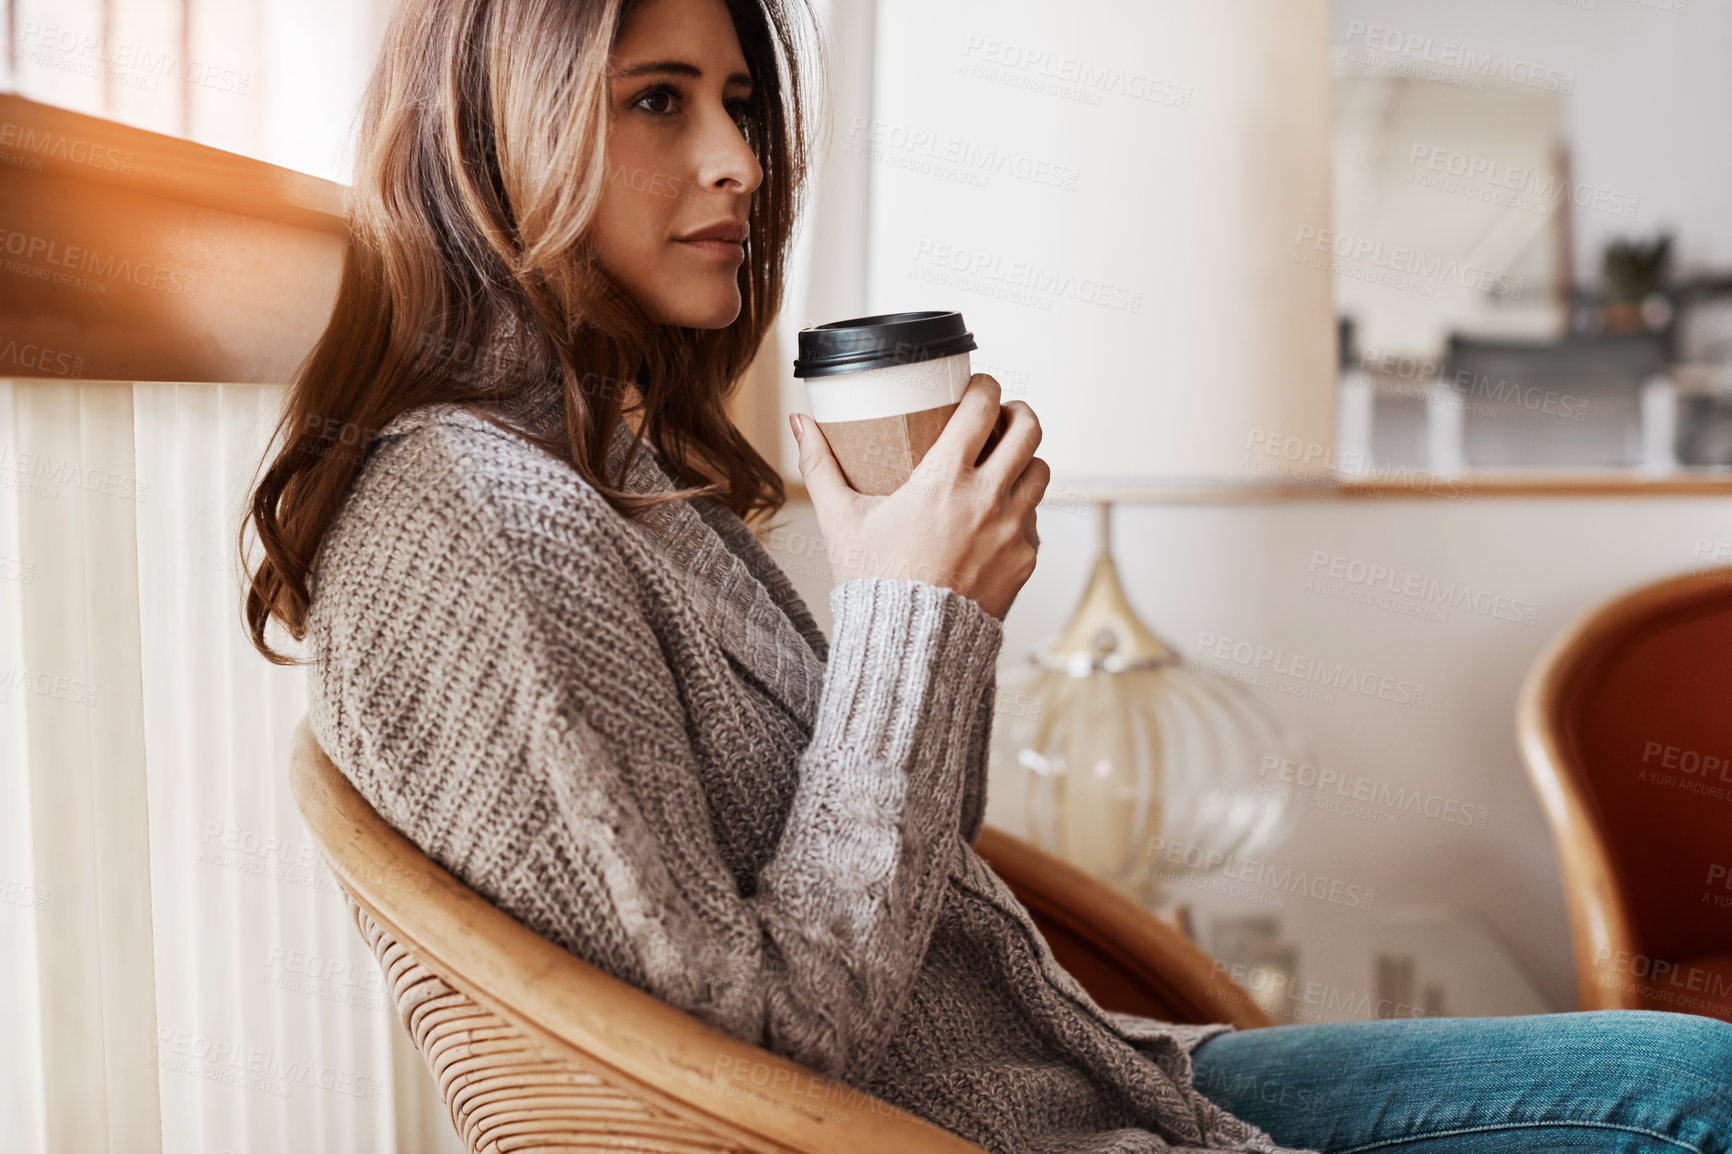 Buy stock photo Shot of an attractive young woman relaxing at home with a cup of coffee